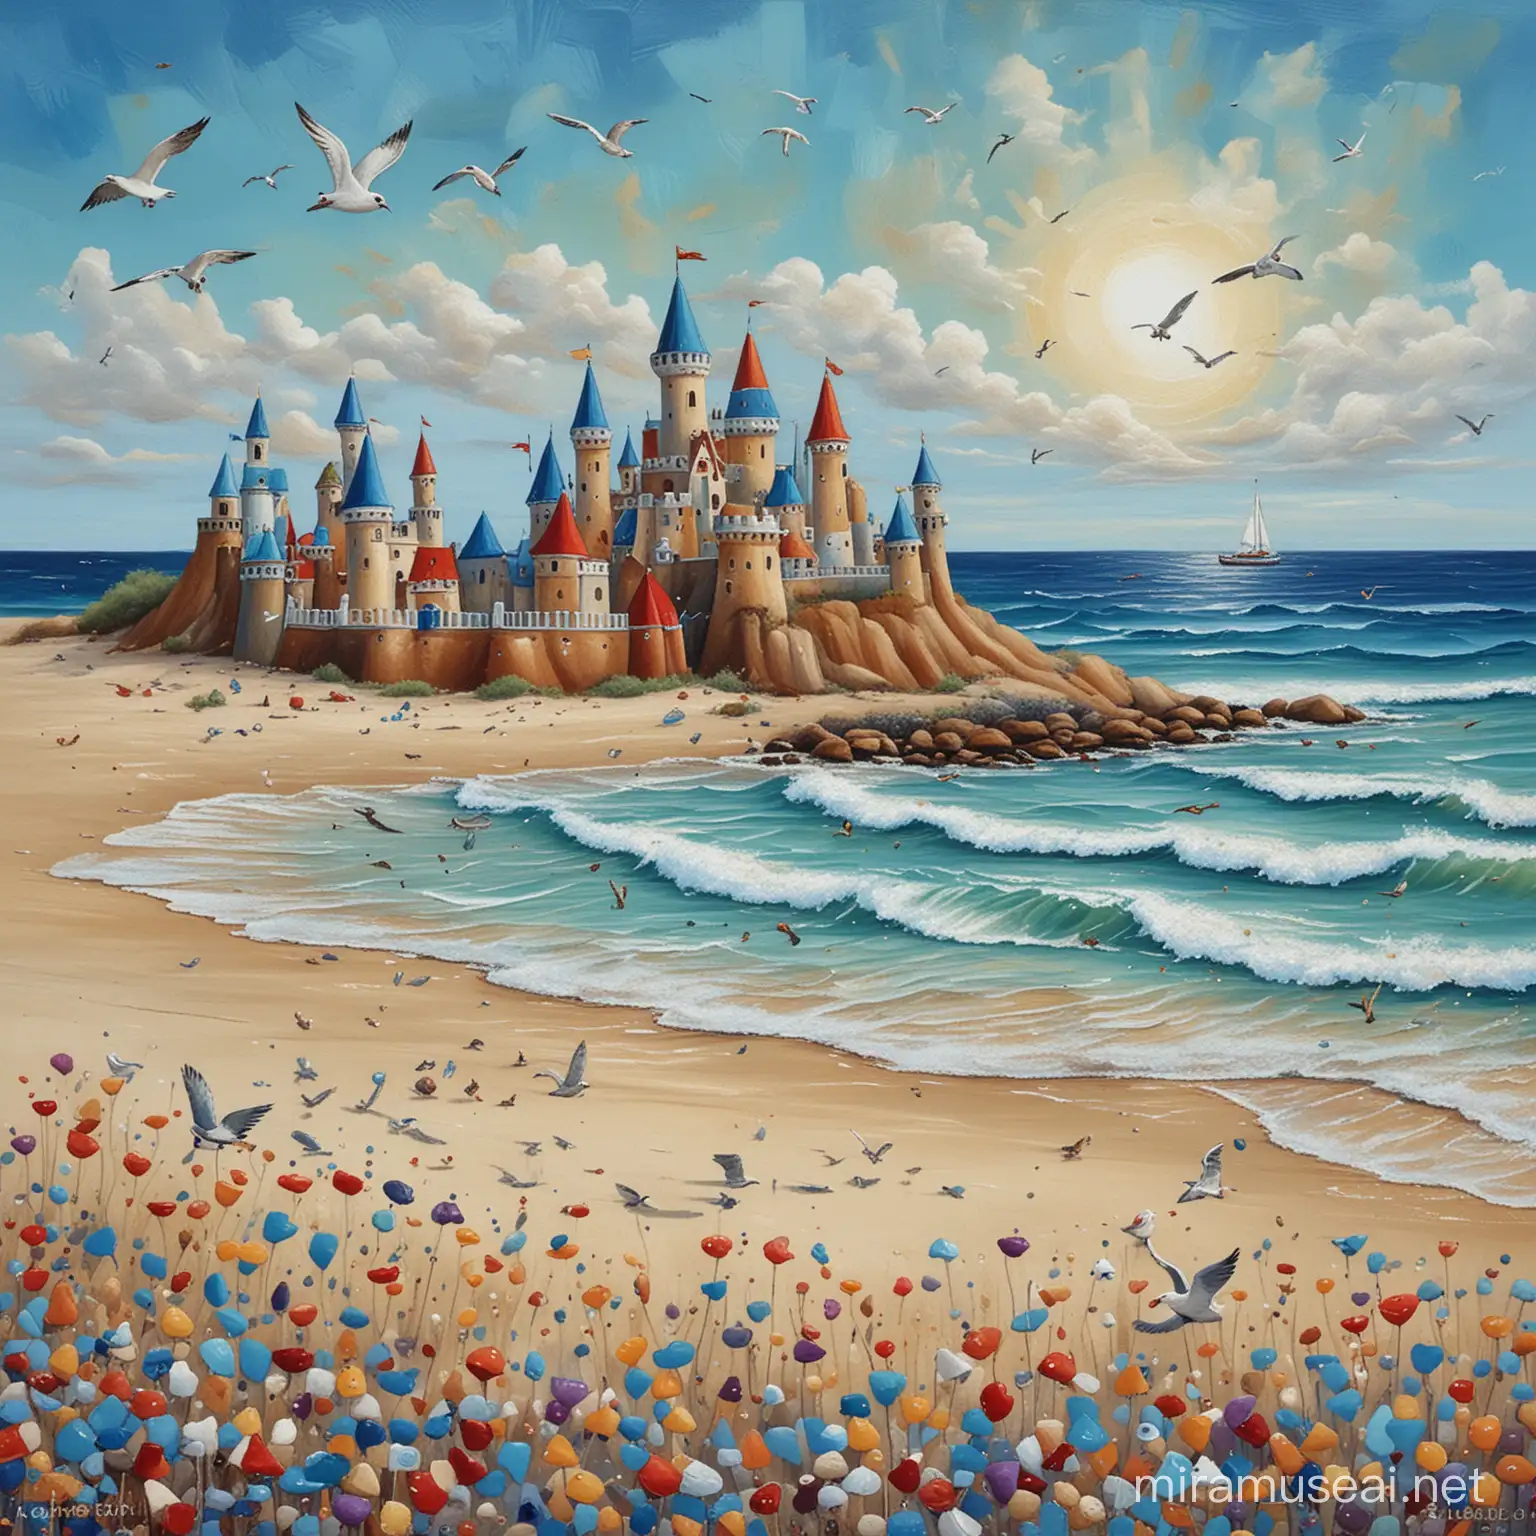 Playful Beach Scene with Colorful Sand Castles and Seagulls